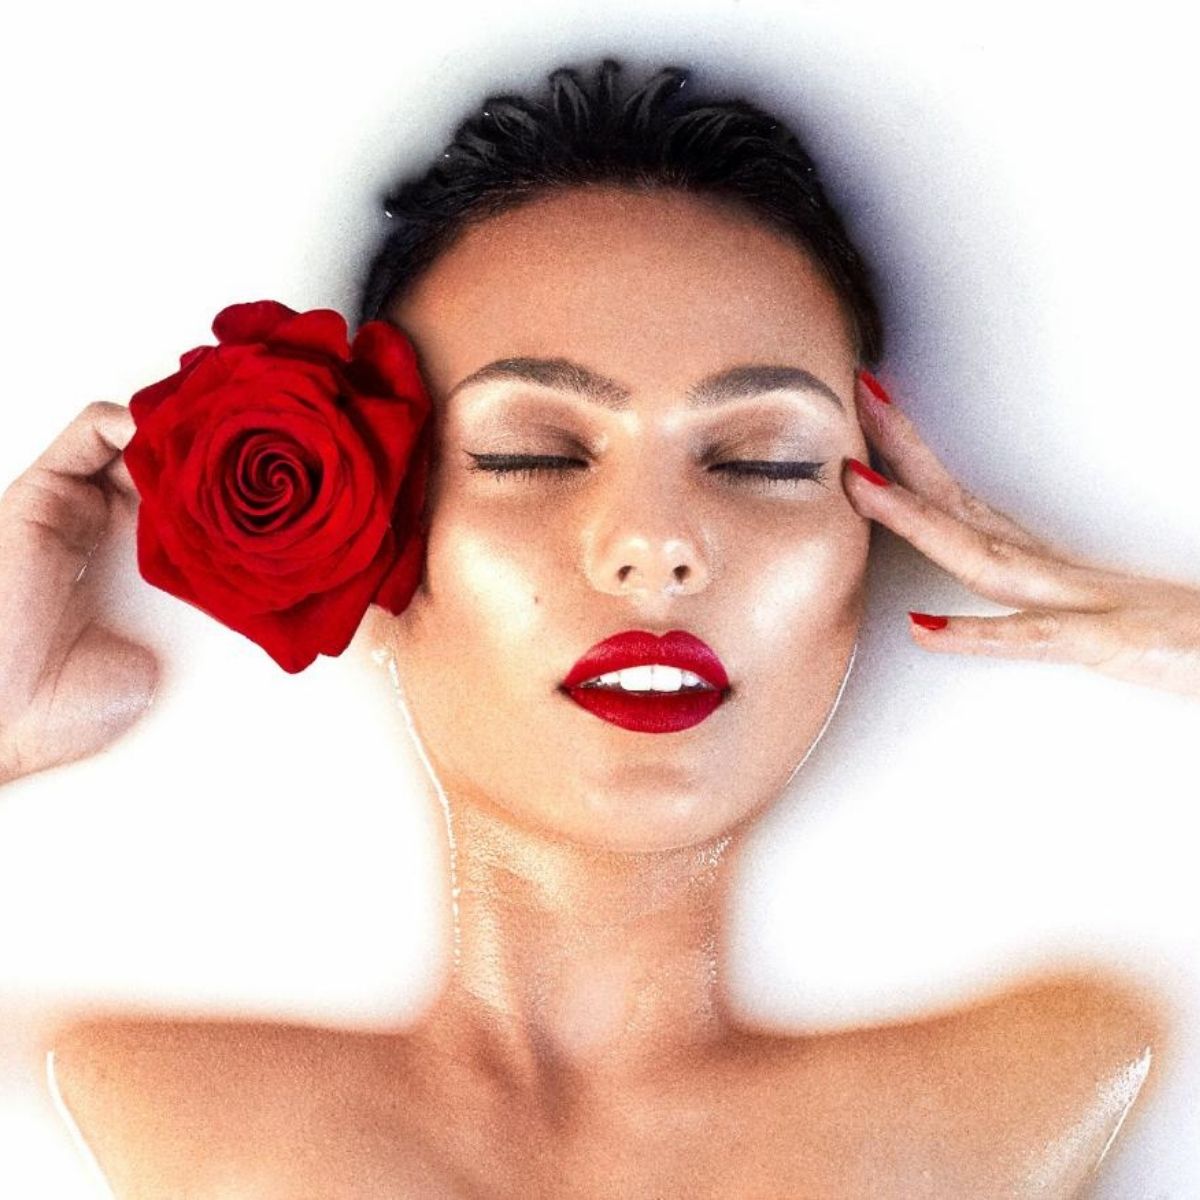 Natural Seduction Campaign Preserved Roses from Lulu Eternal Roses - on Thursd